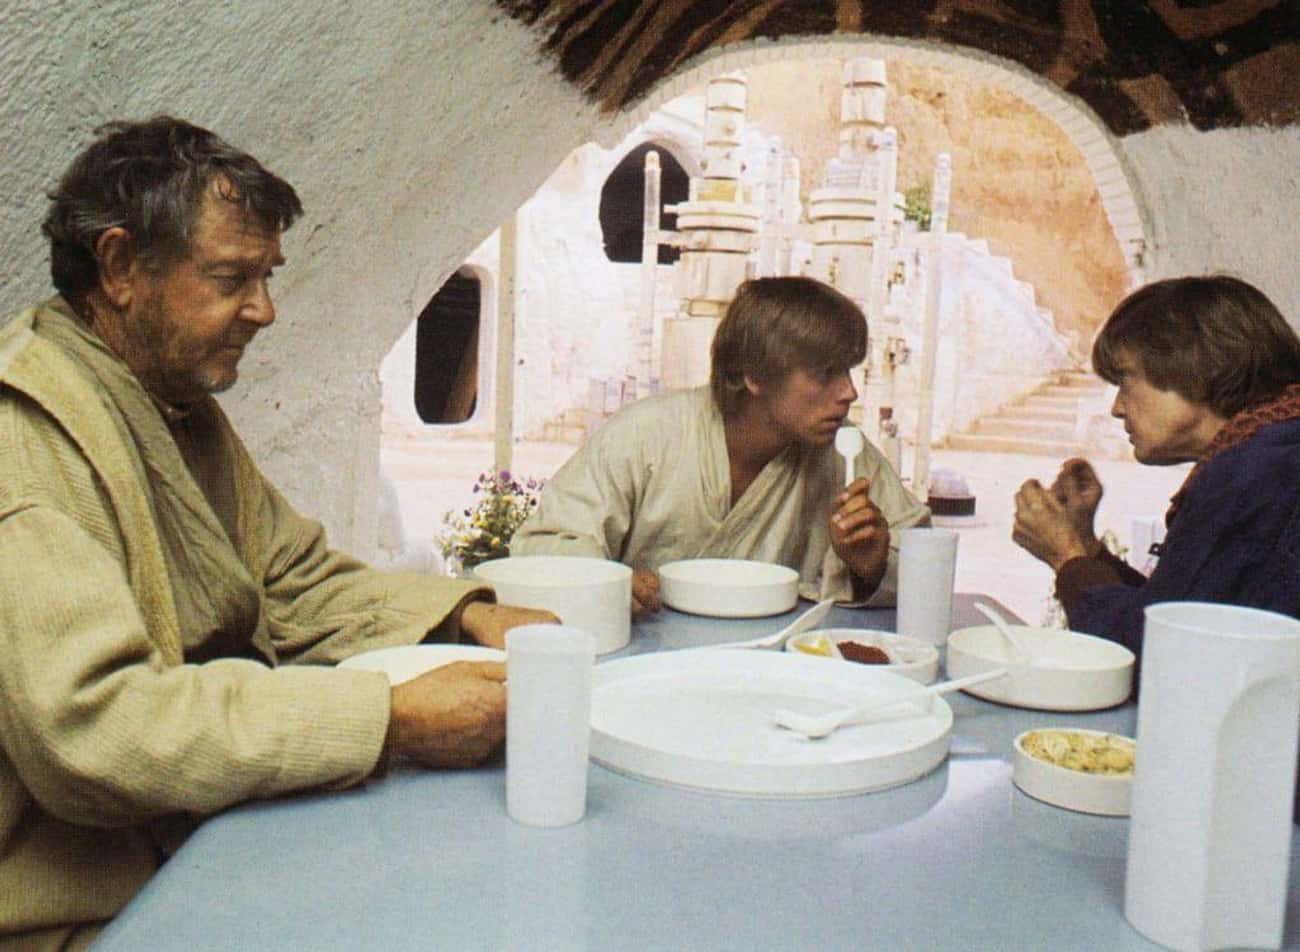 Luke Didn't Grieve Them Until After He Blew Up The Death Star